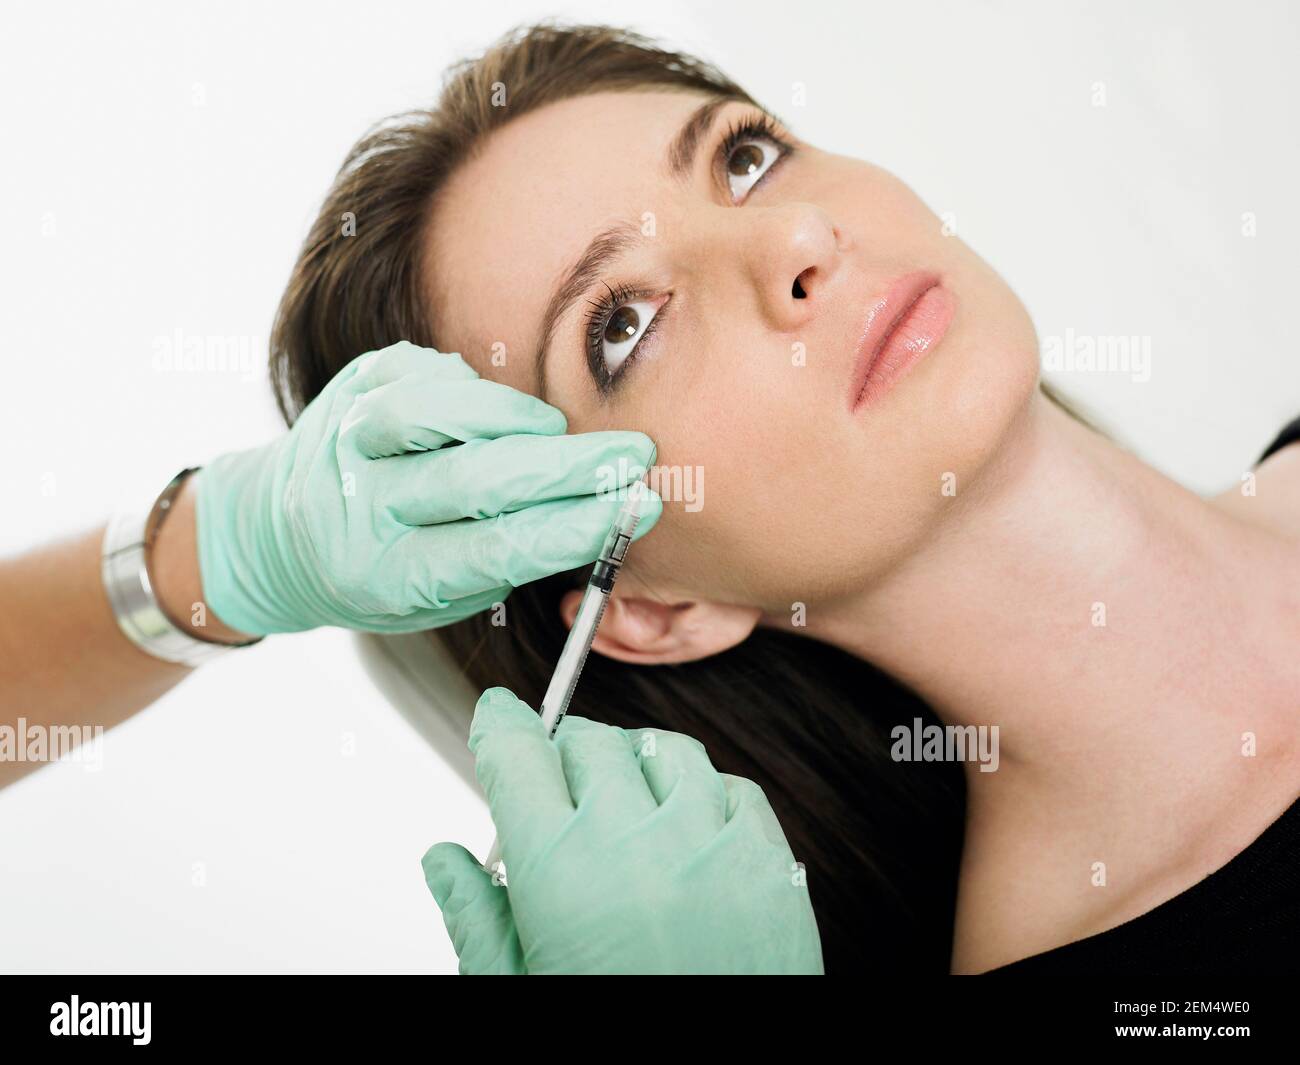 Close-up of a mid adult woman getting a botox injection on her face Stock Photo